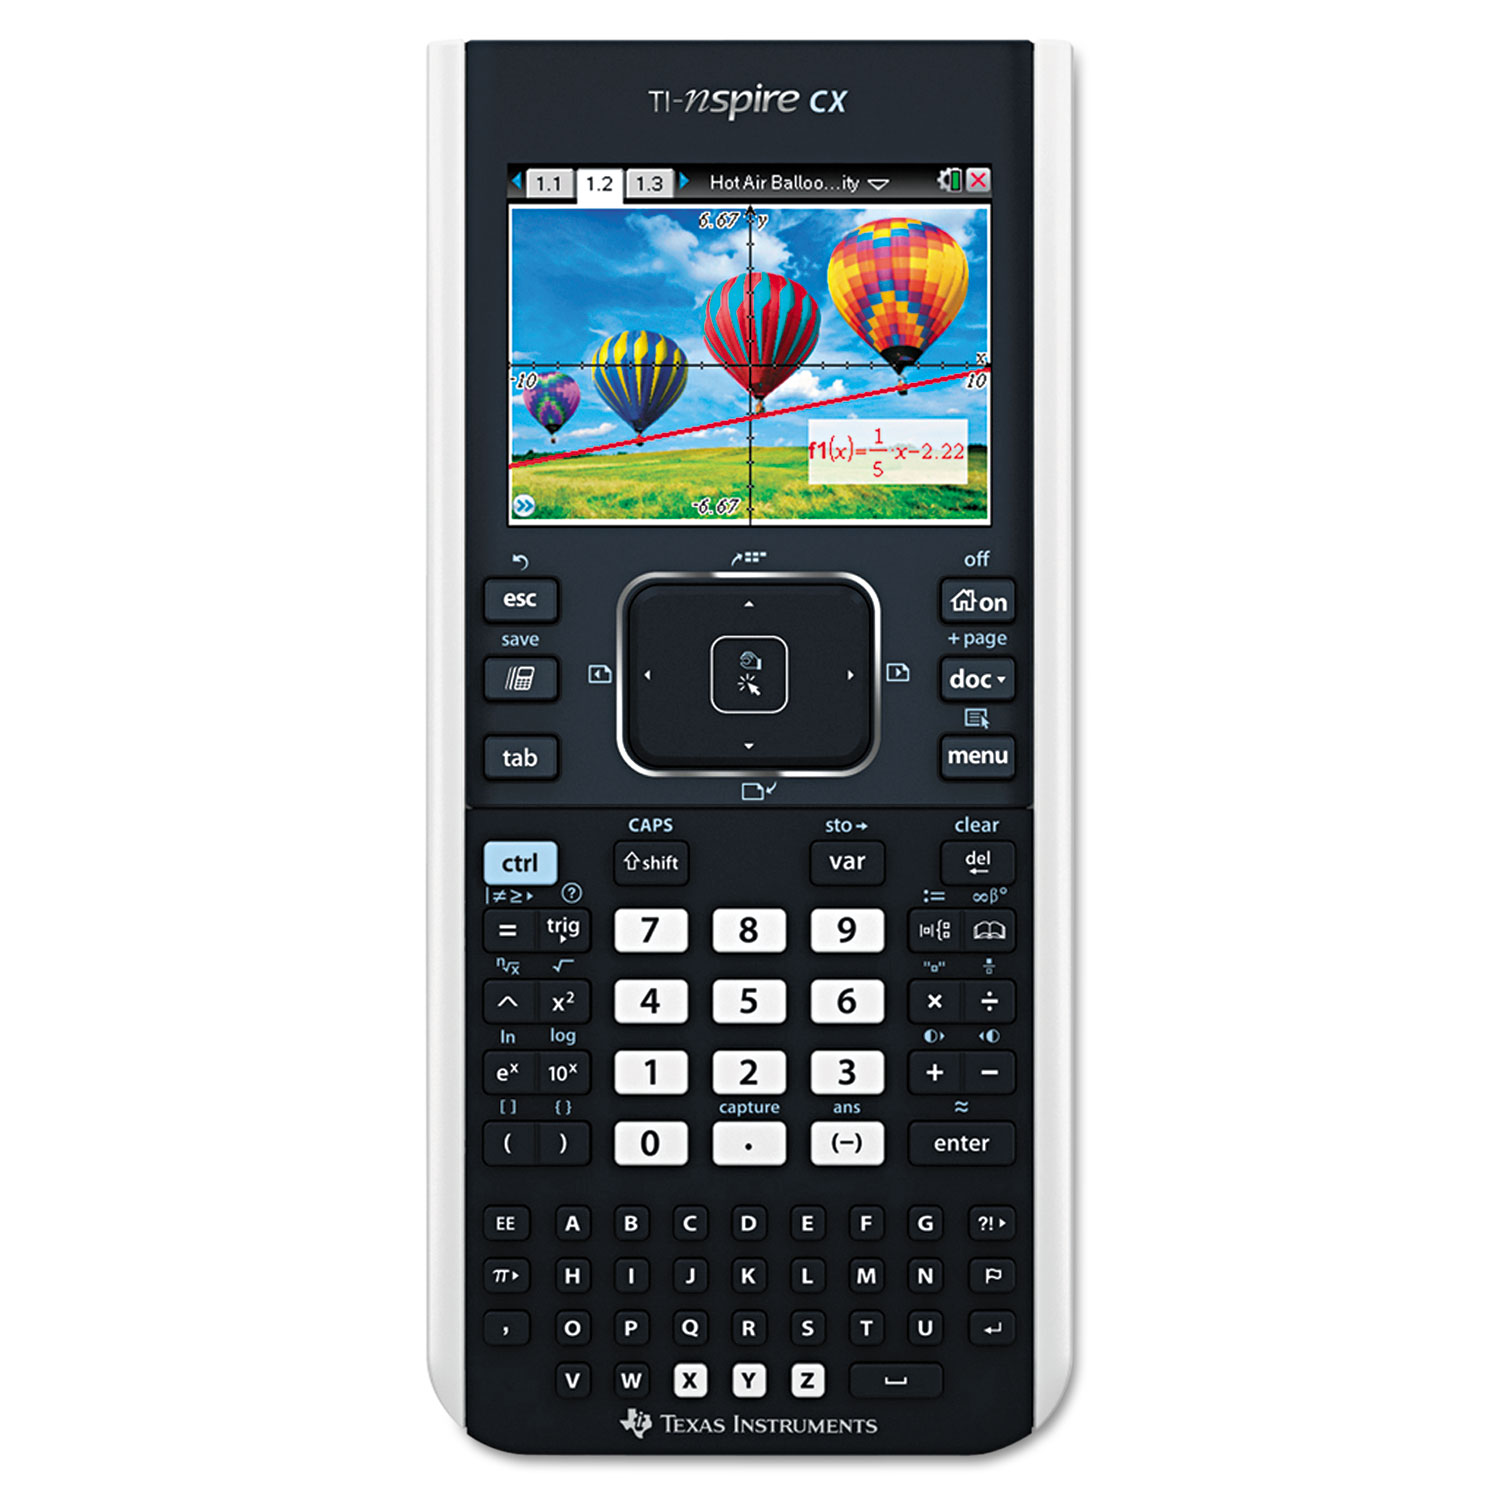  Texas Instruments NSCX2/TBL/1L1 TI-Nspire CX Handheld Graphing Calculator with Full-Color Display (TEXTINSPIRECX) 